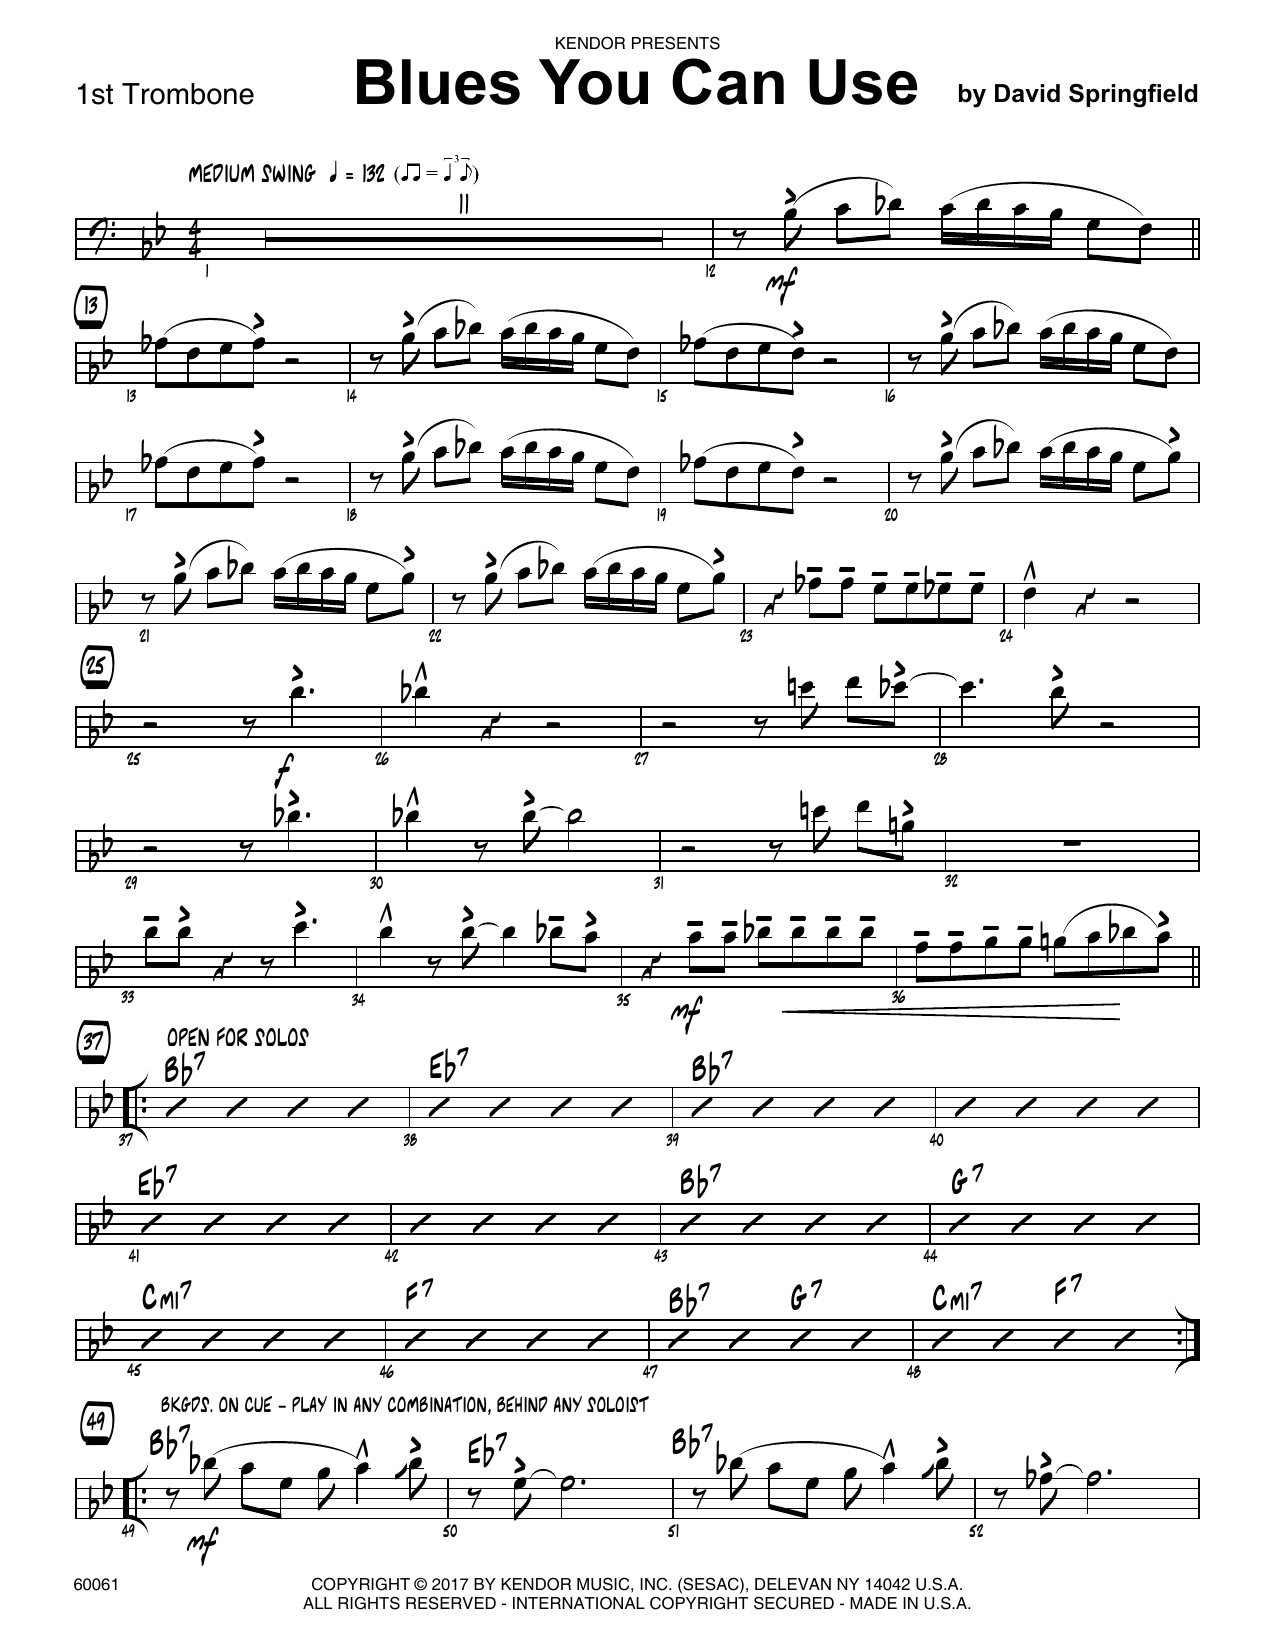 Download David Springfield Blues You Can Use - 1st Trombone Sheet Music